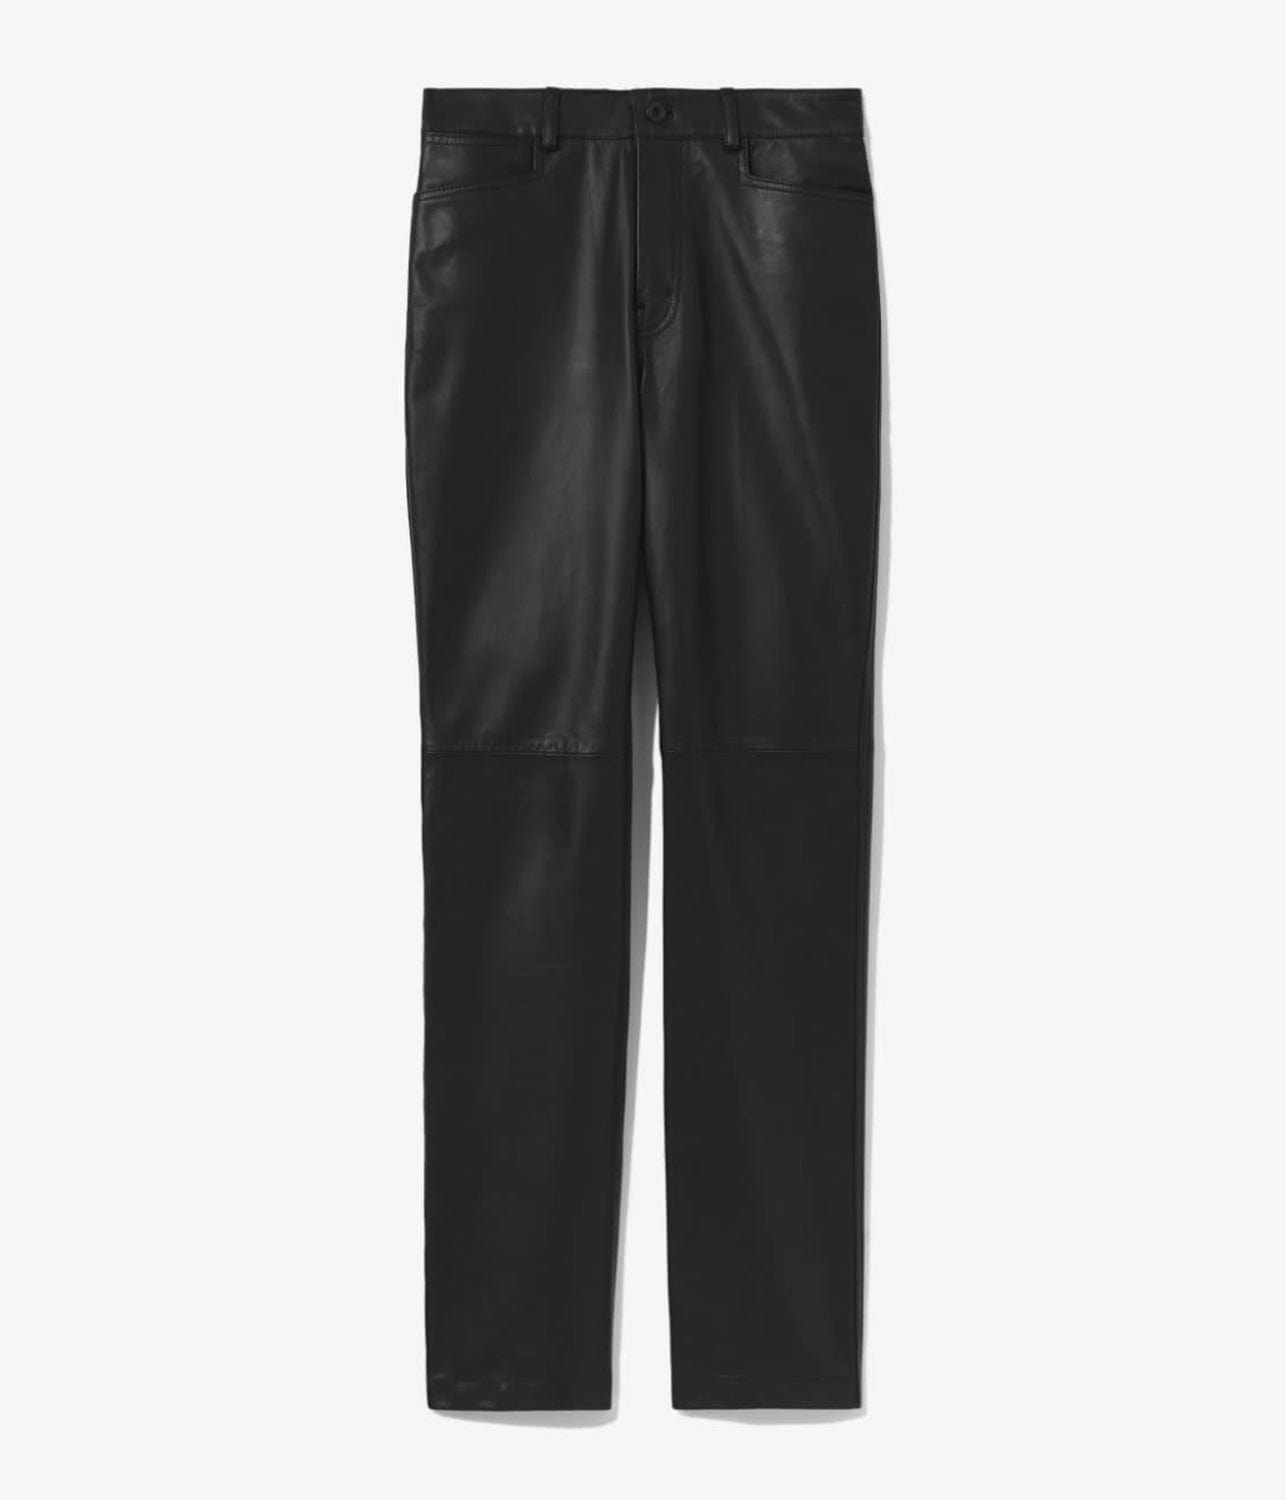 PROENZA SCHOULER WHITE LABEL LEATHER STRAIGHT PANT - BLACK